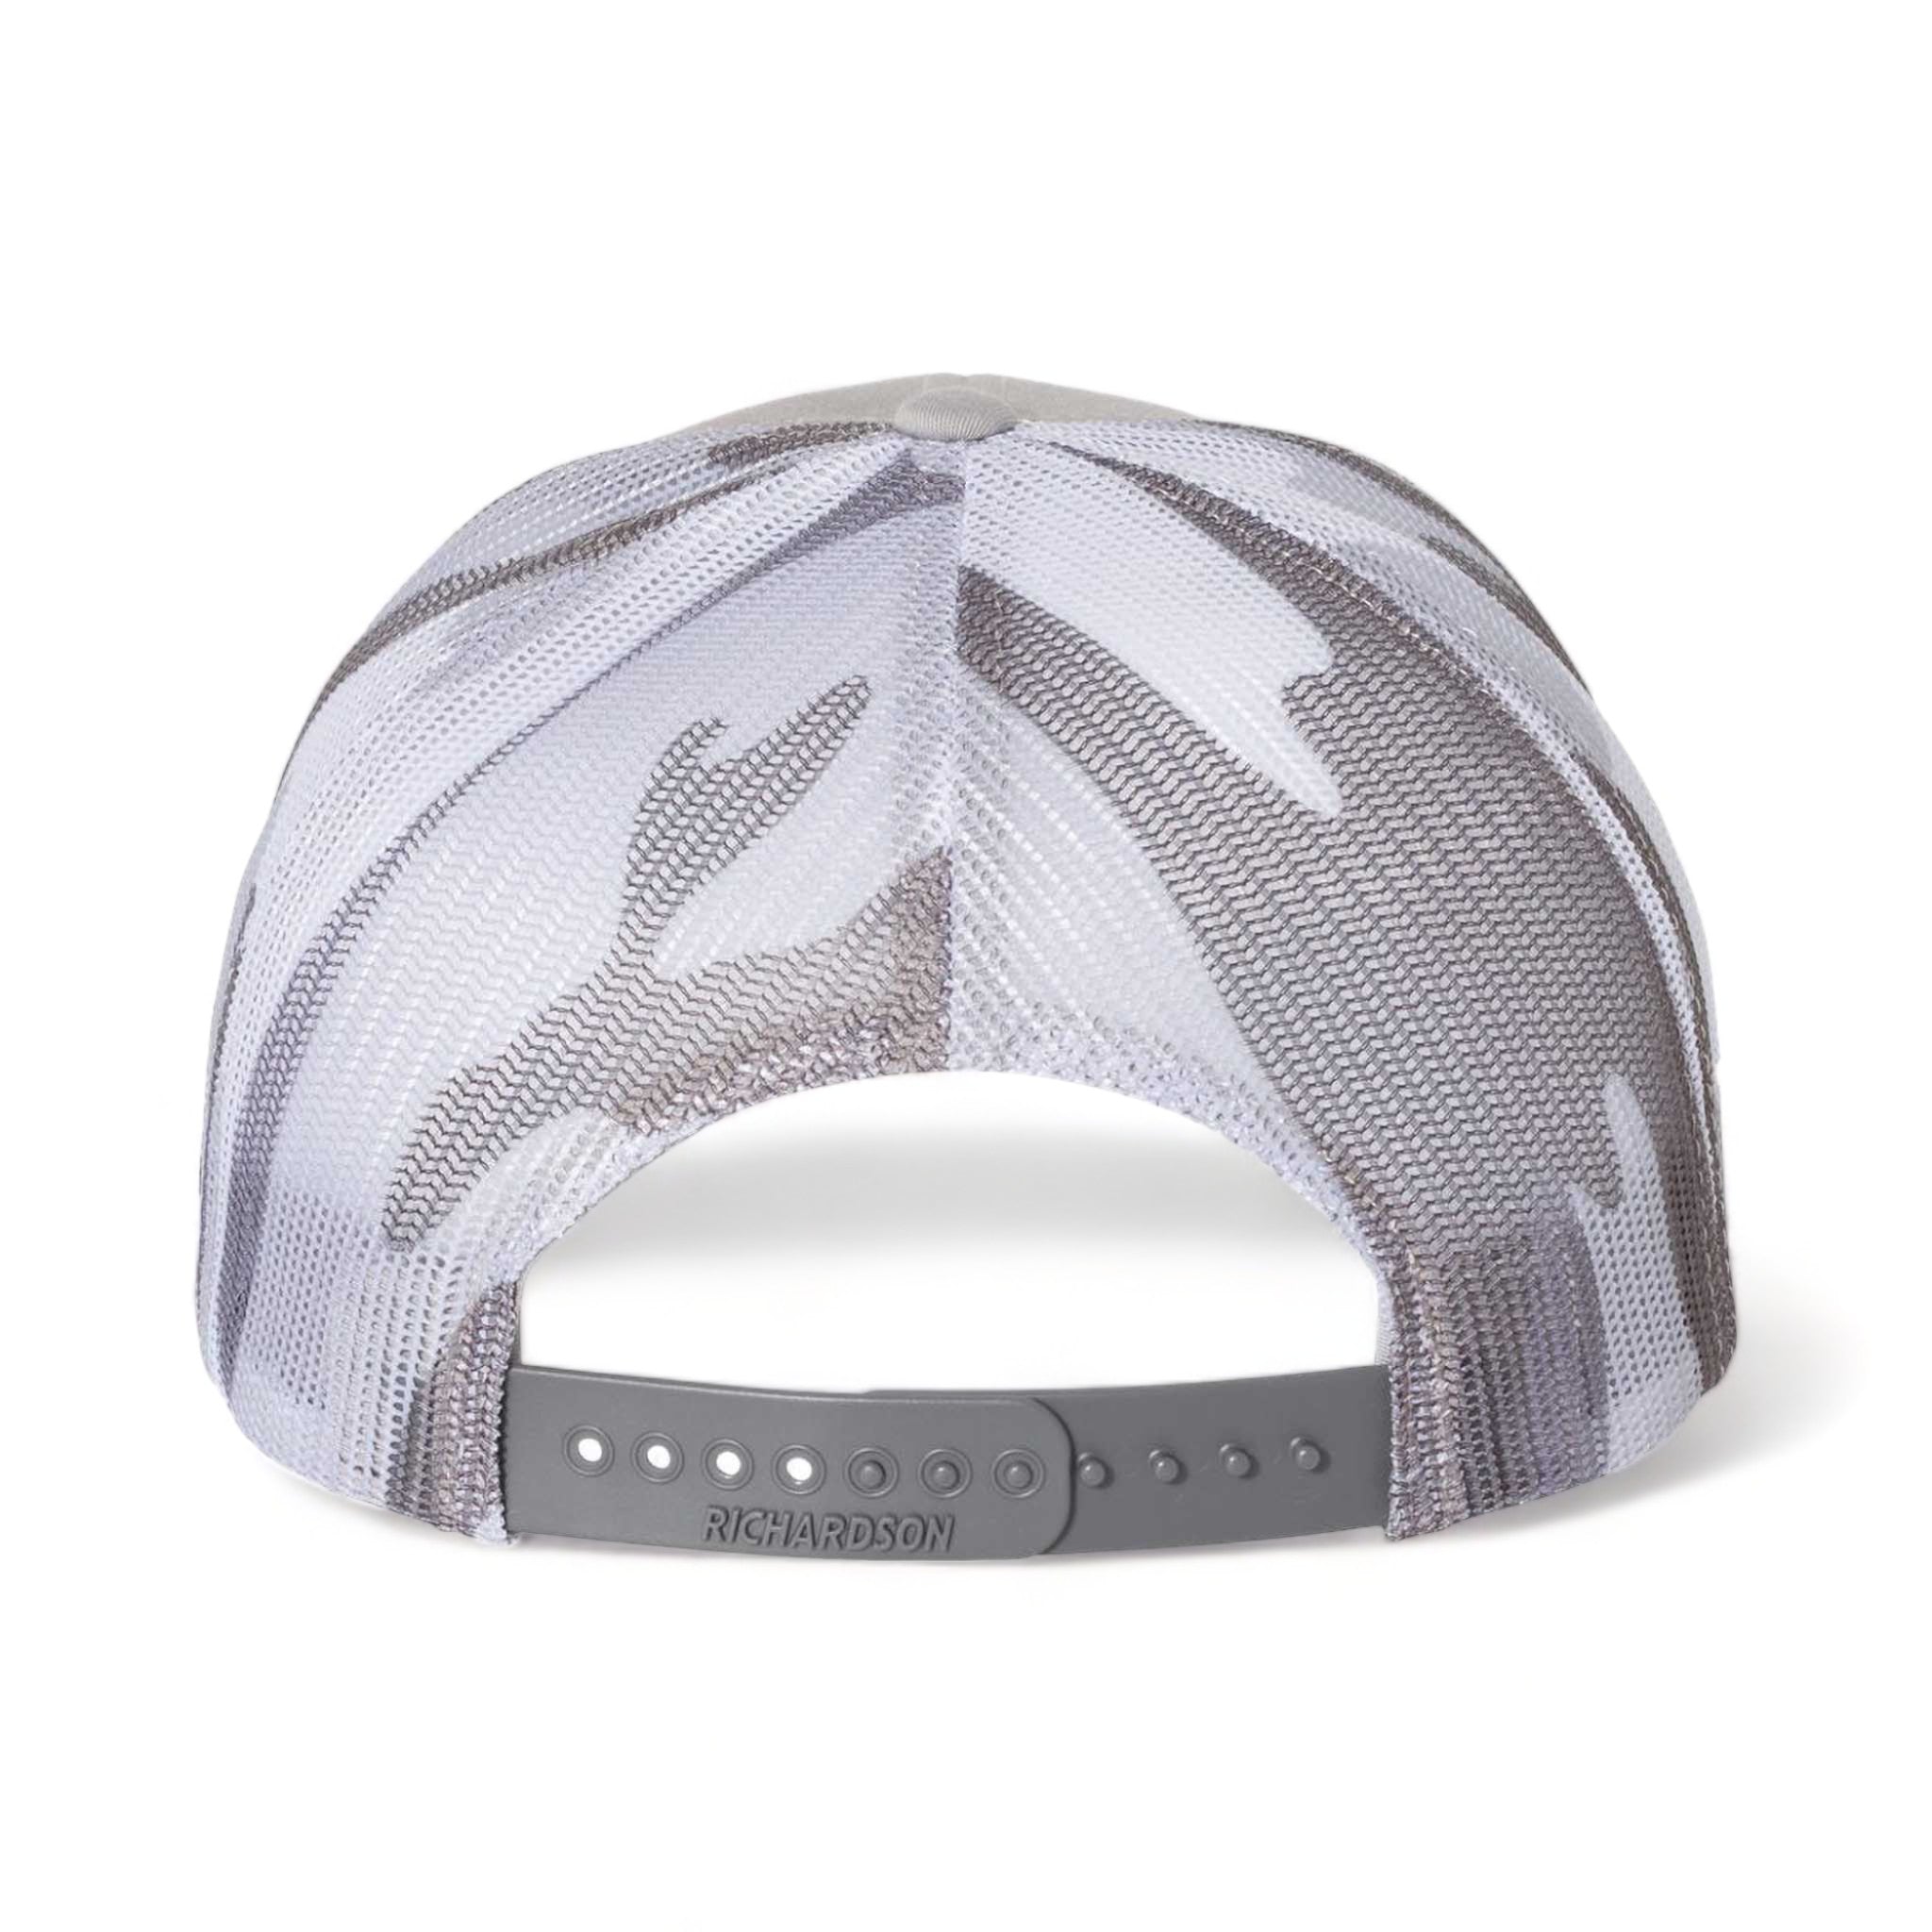 Back view of Richardson 112PM custom hat in silver and grey camo